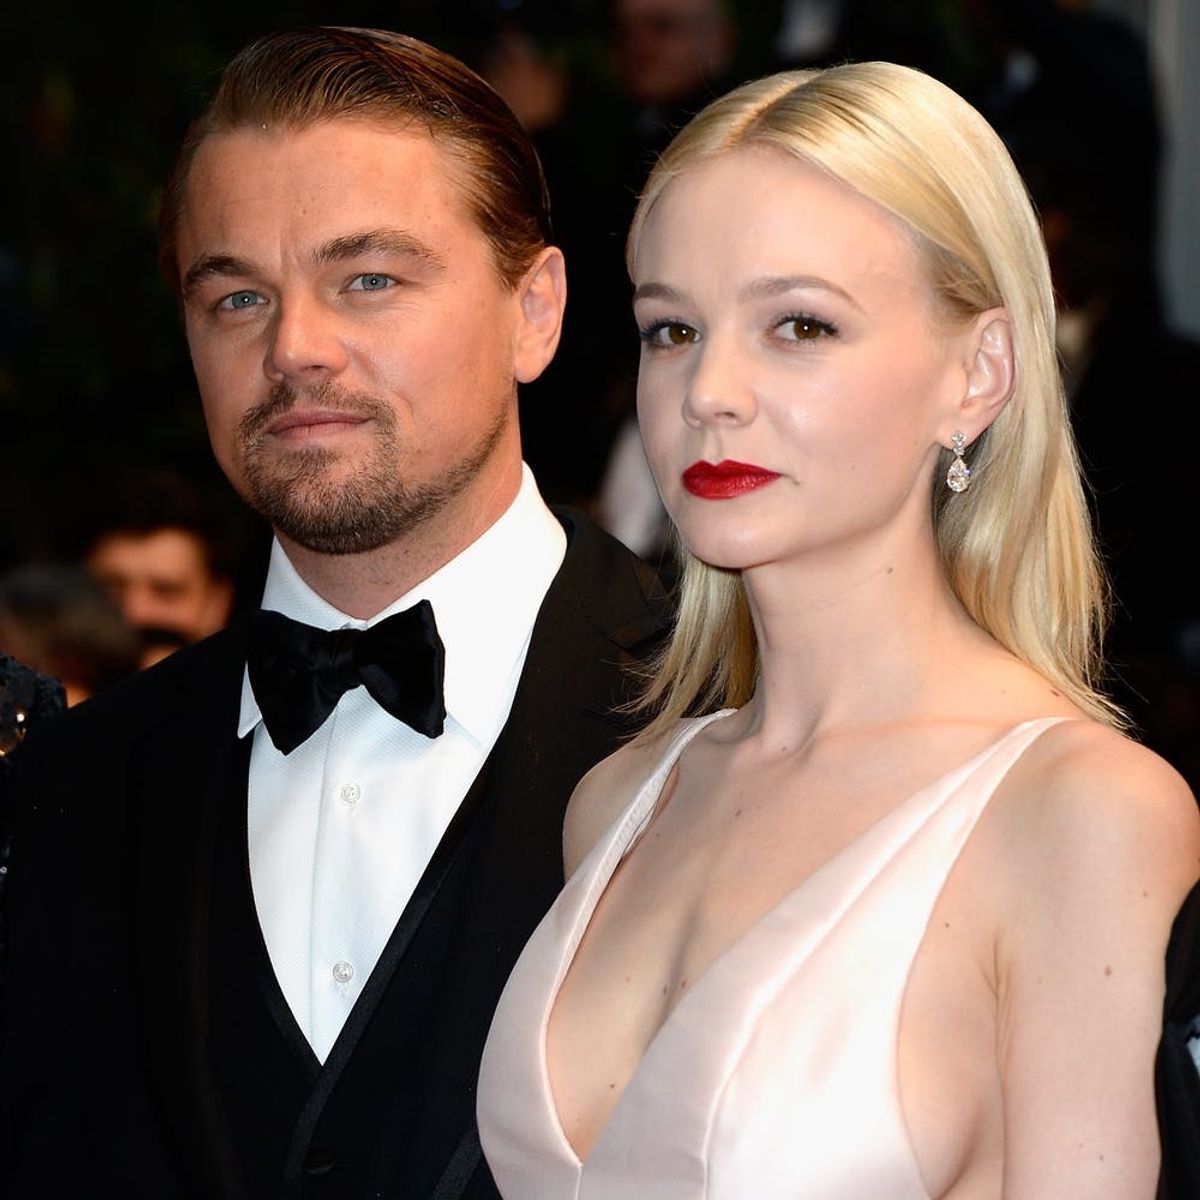 Carey Mulligan Confesses She “Didn’t Love” Her Performance in “The Great Gatsby”